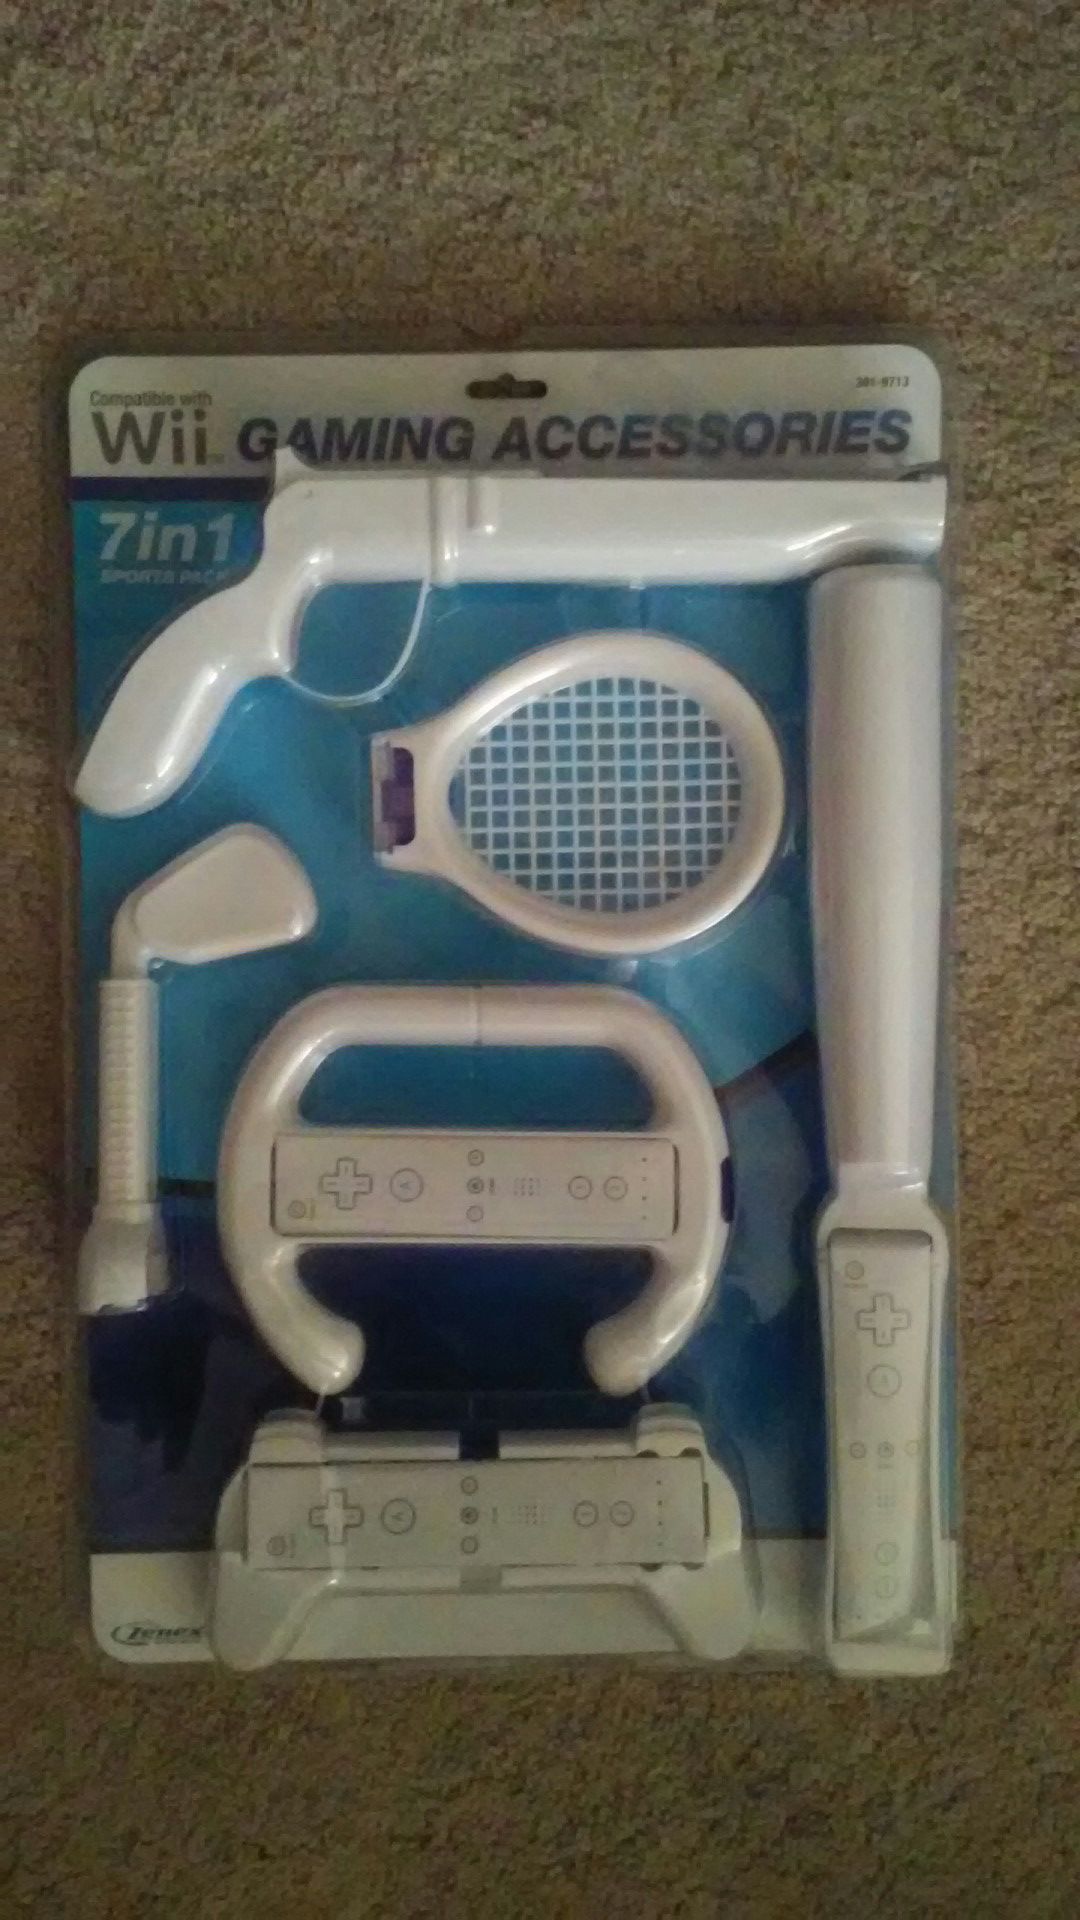 BRAND NEW... GAMING ACCESSORIES SET FOR SPORTS 7 IN 1 PACKAGE.